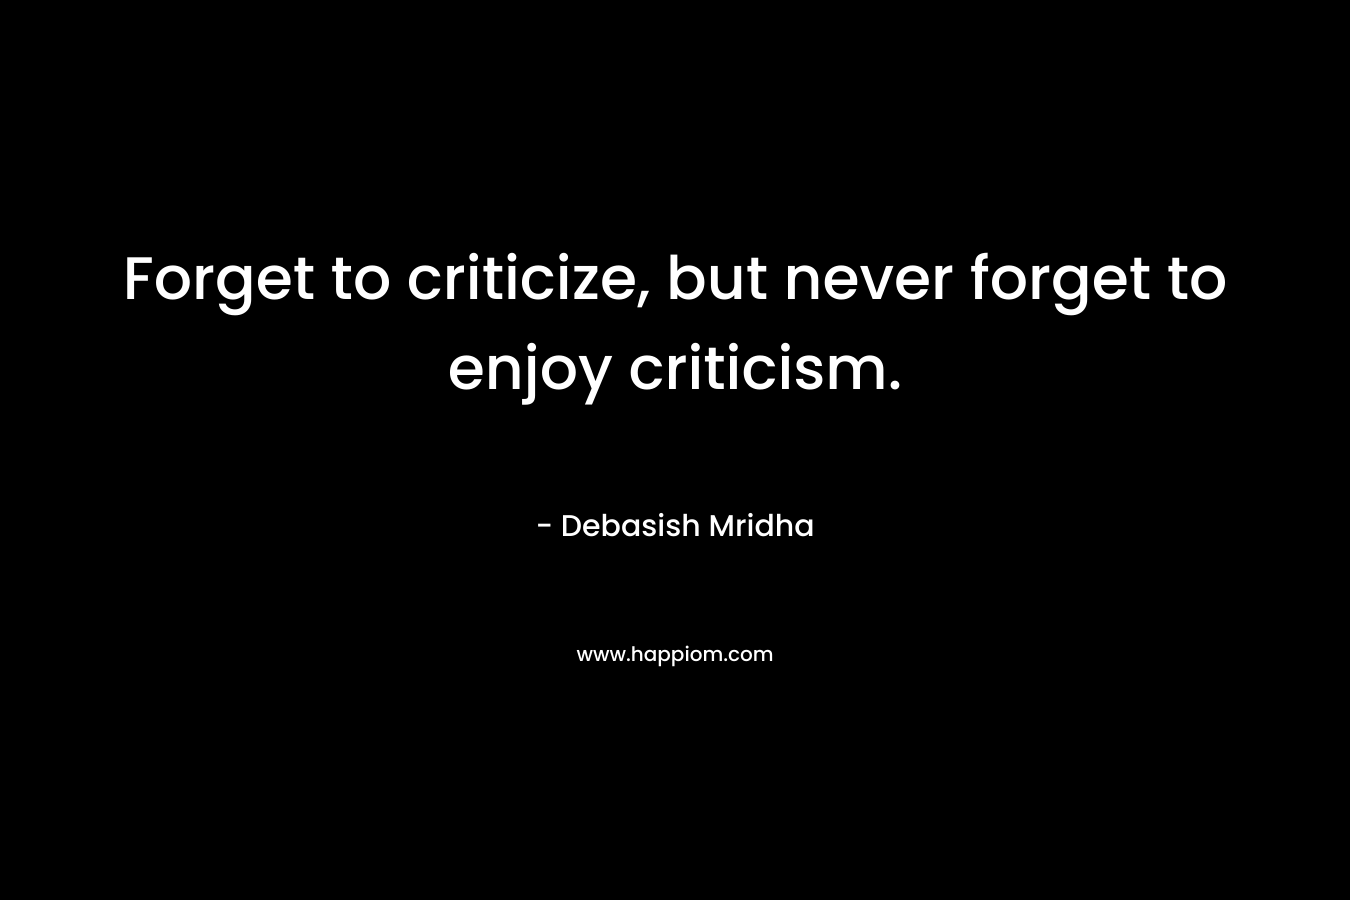 Forget to criticize, but never forget to enjoy criticism.